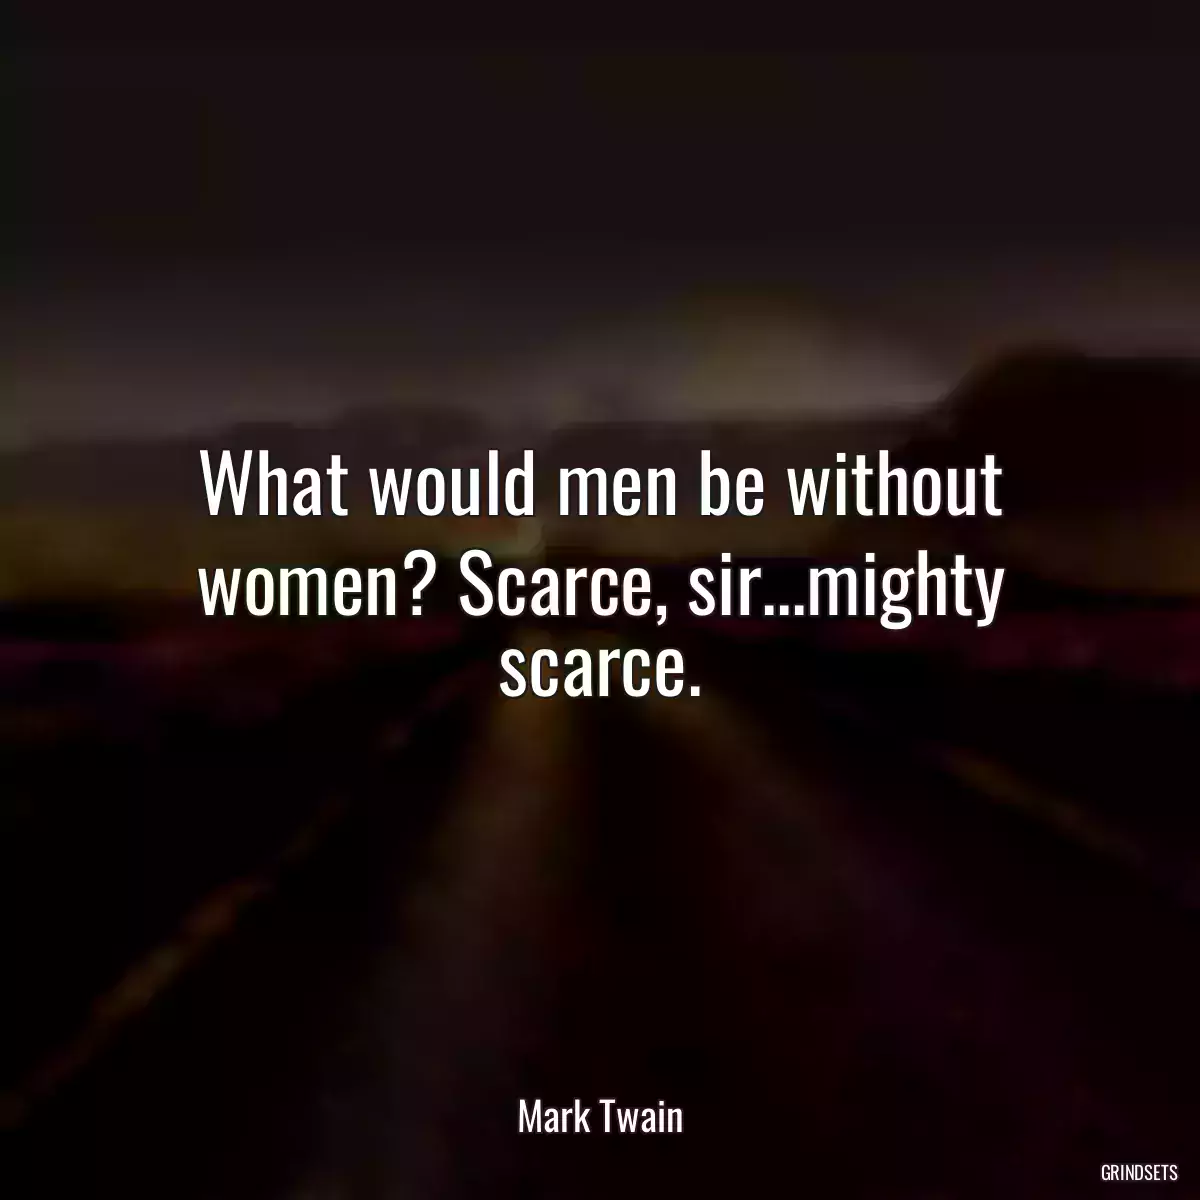 What would men be without women? Scarce, sir...mighty scarce.